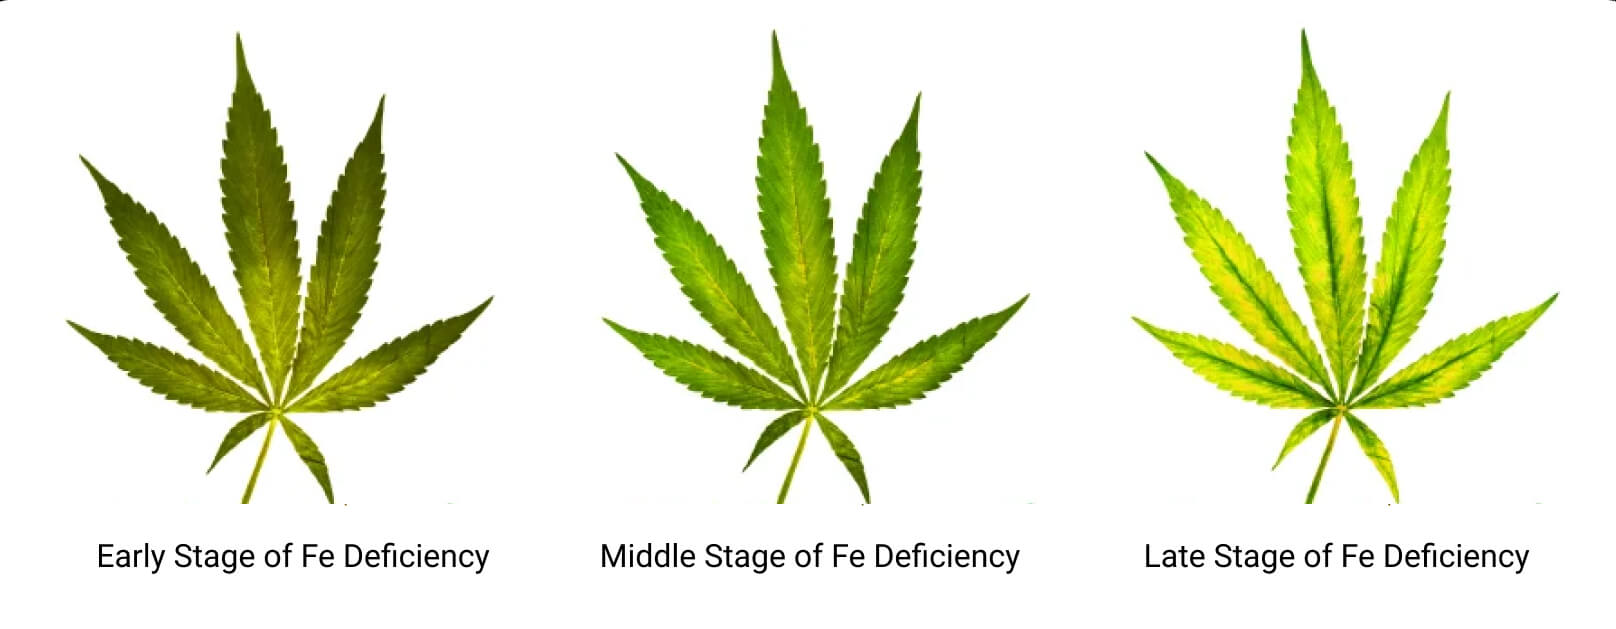 Stages of Iron Deficiency